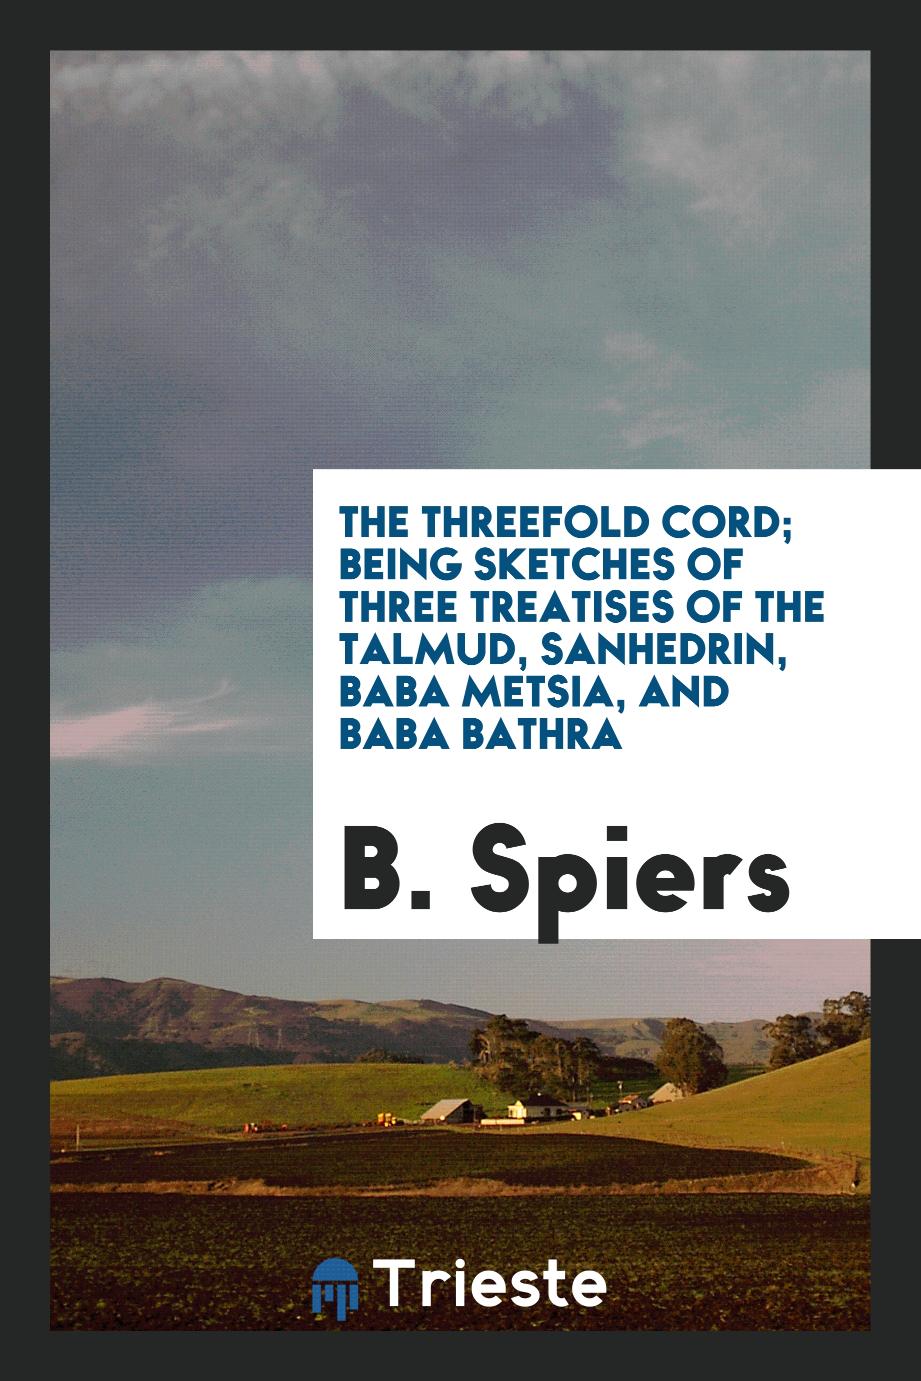 The Threefold Cord; Being Sketches of Three Treatises of the Talmud, Sanhedrin, Baba Metsia, and Baba Bathra